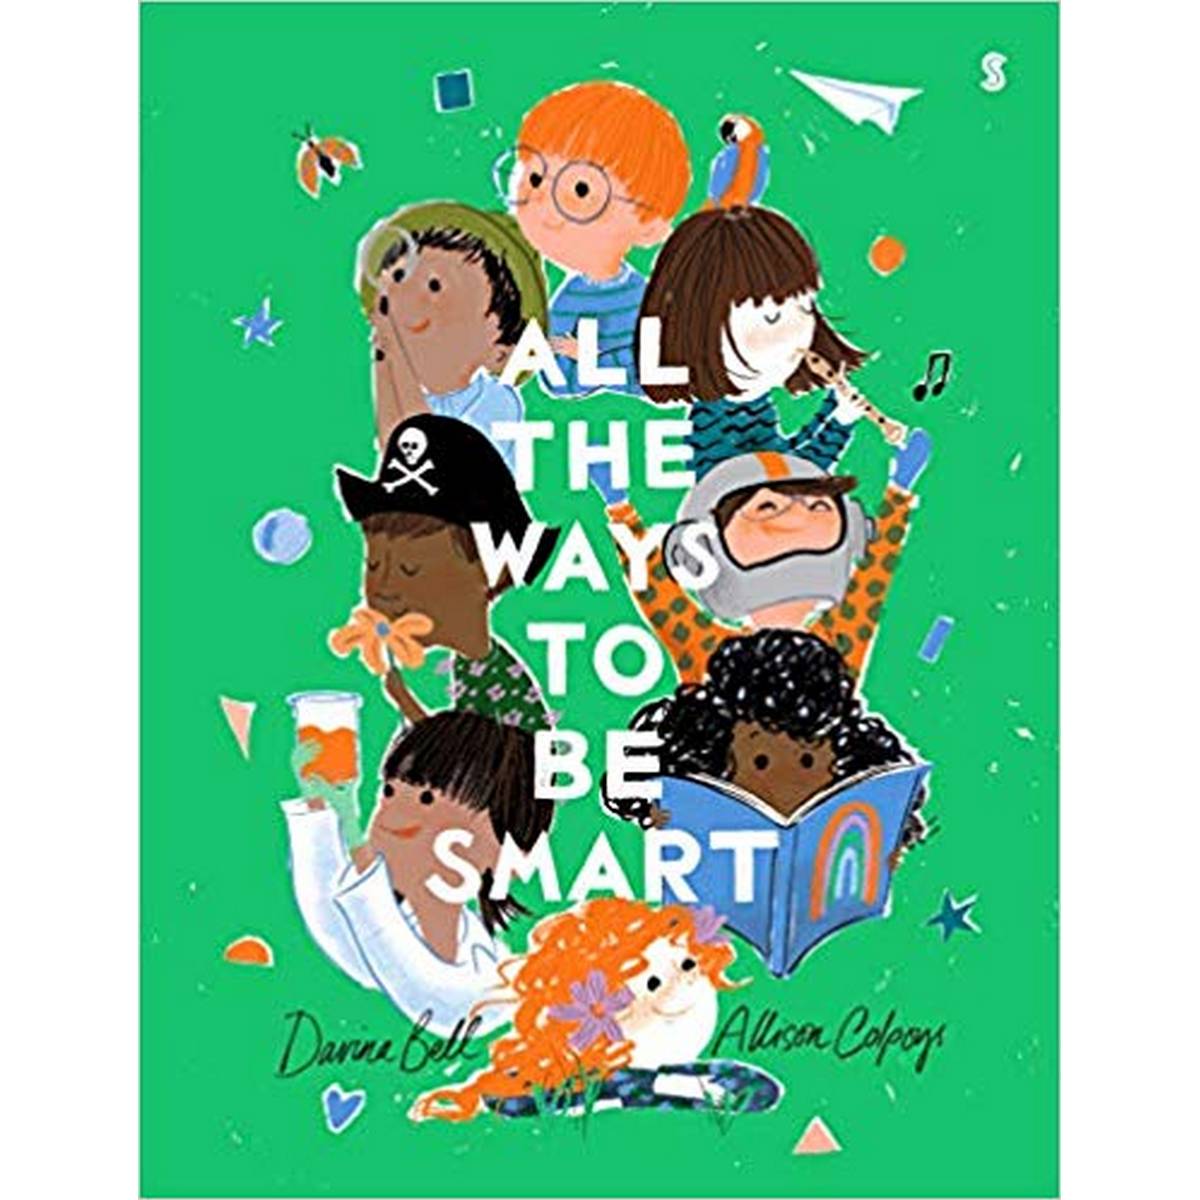 All the Ways to be Smart (Hardcover)